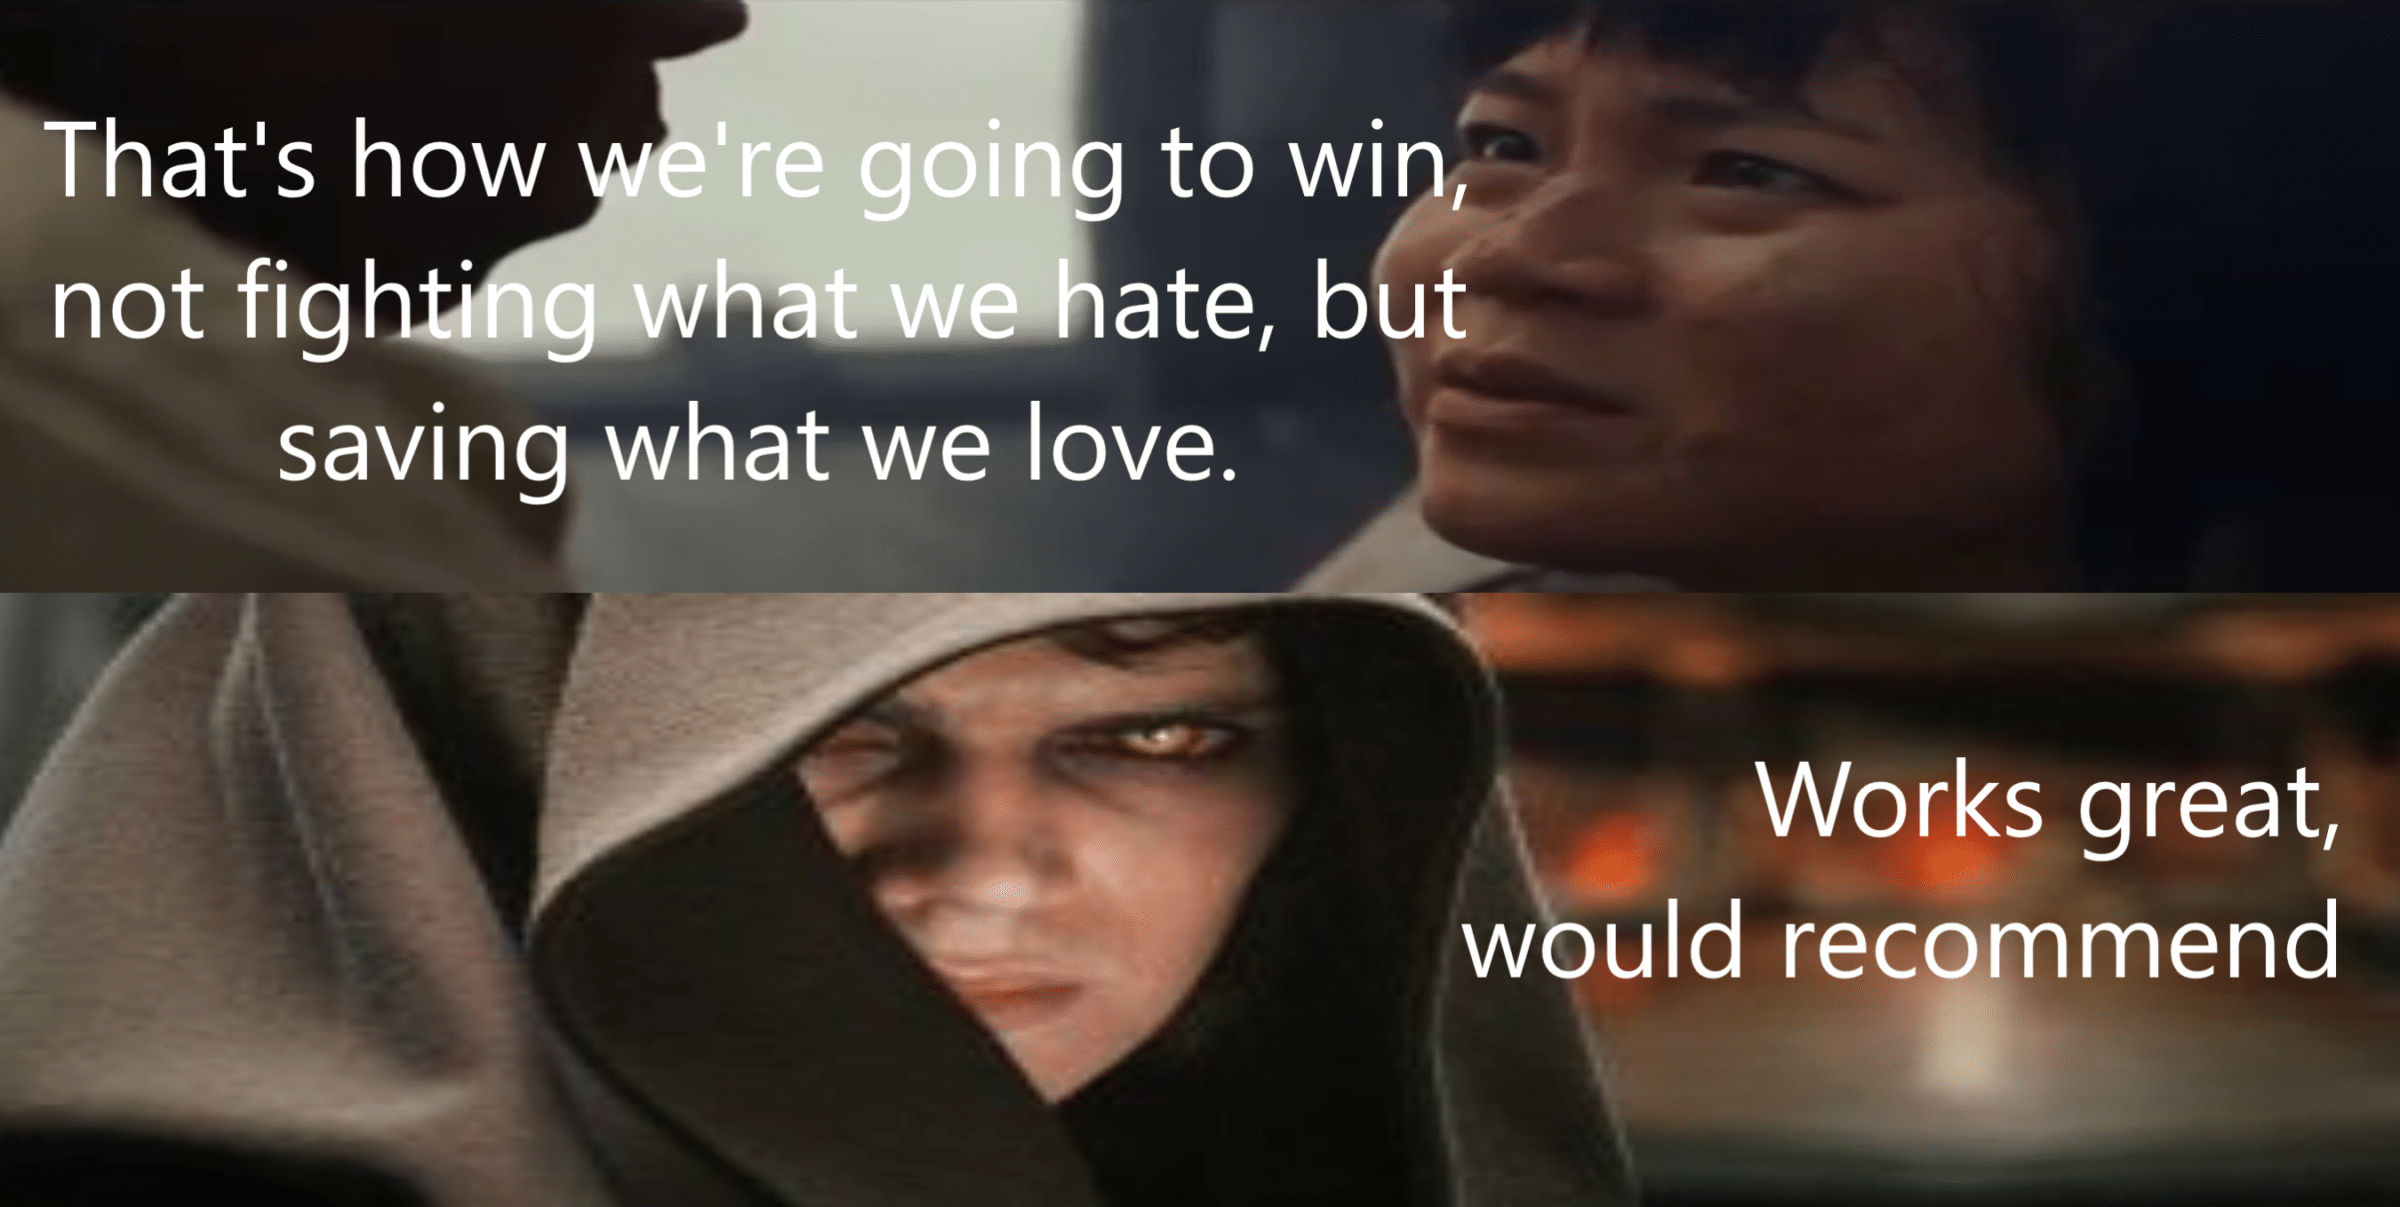 sequel-memes star-wars-memes sequel-memes text: Thatls how re going to win, not fighti g what we hate, but saving what we love. Works great/ would recommend 